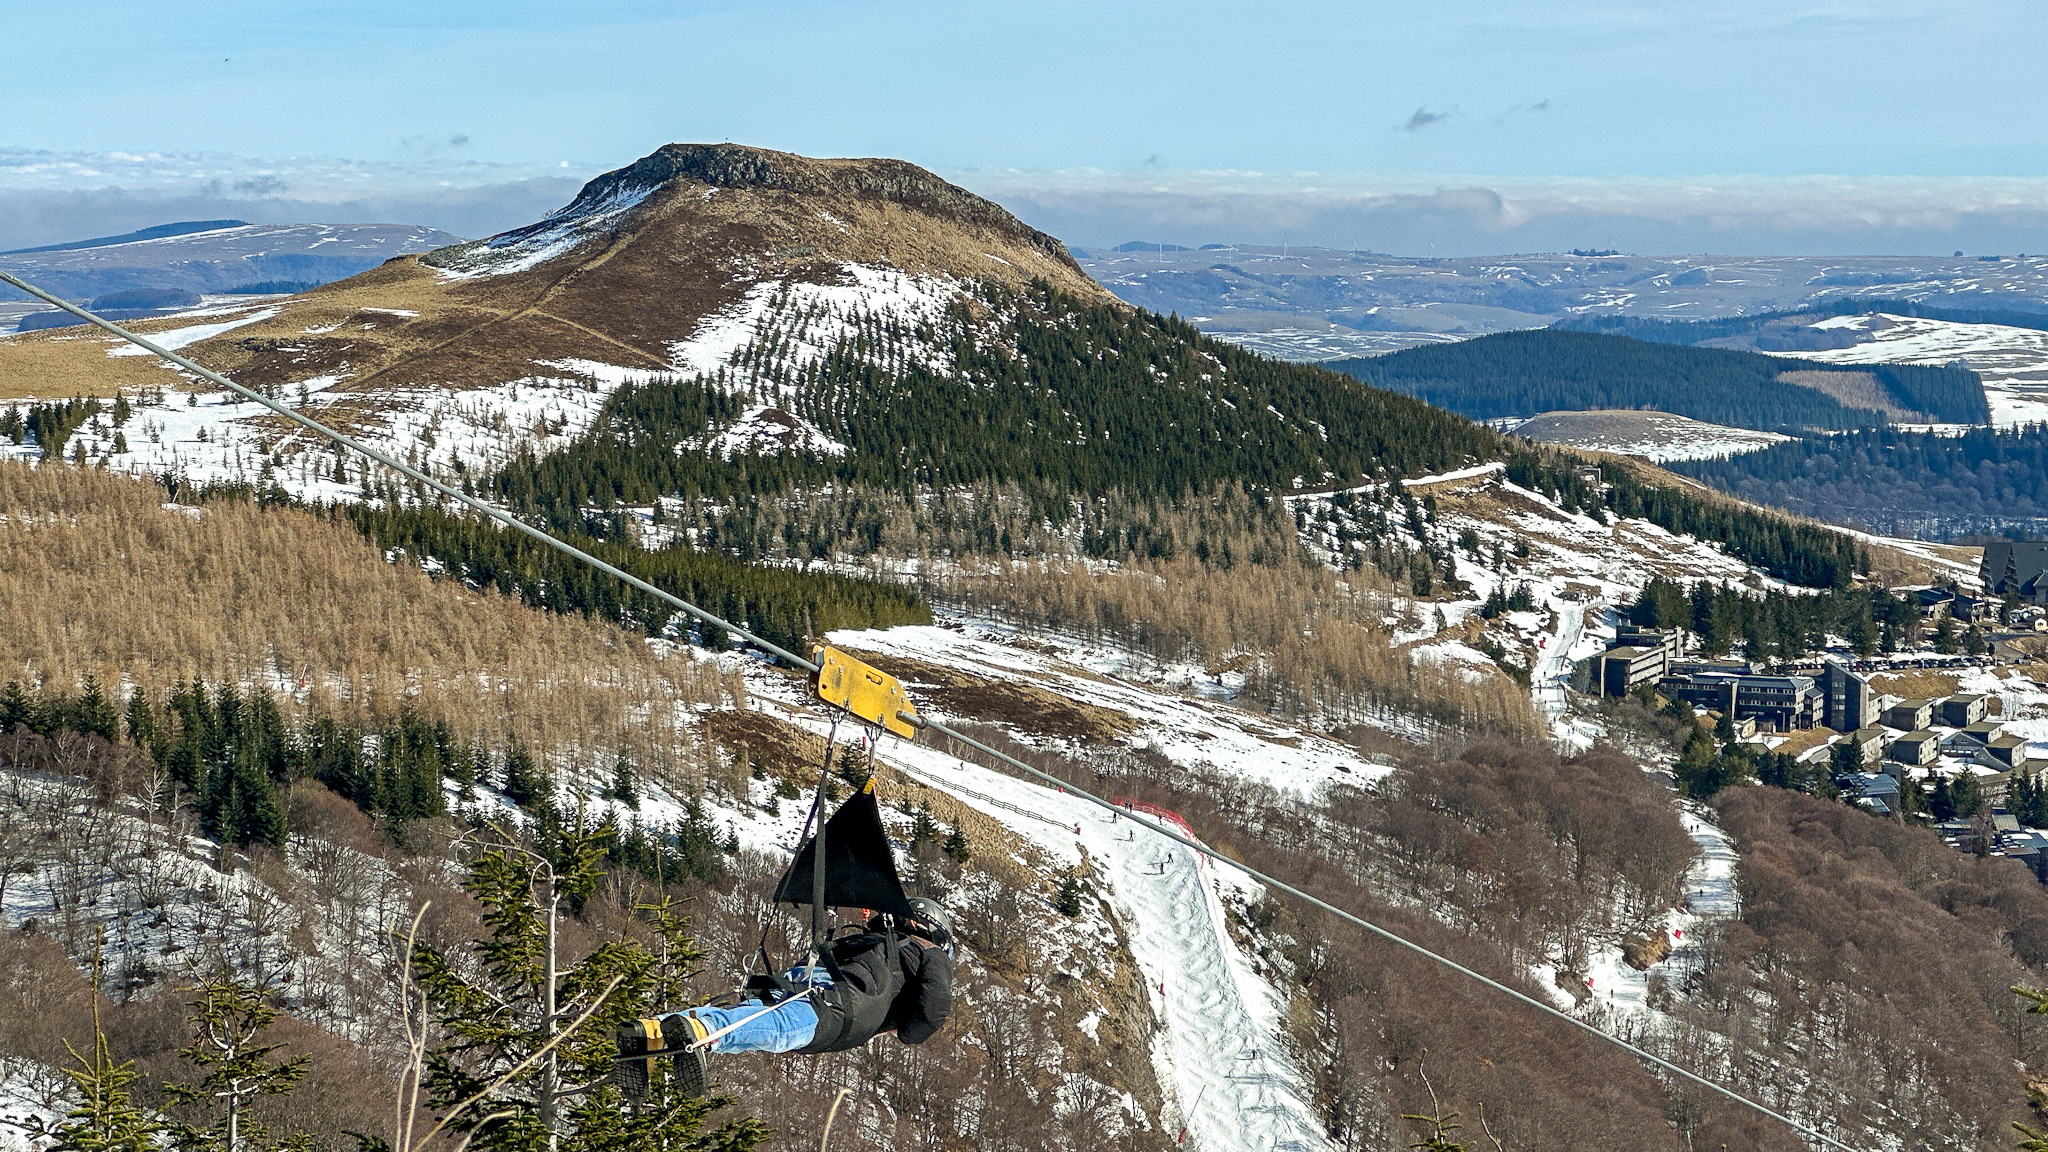 Super Besse Zipline, Launched at full speed